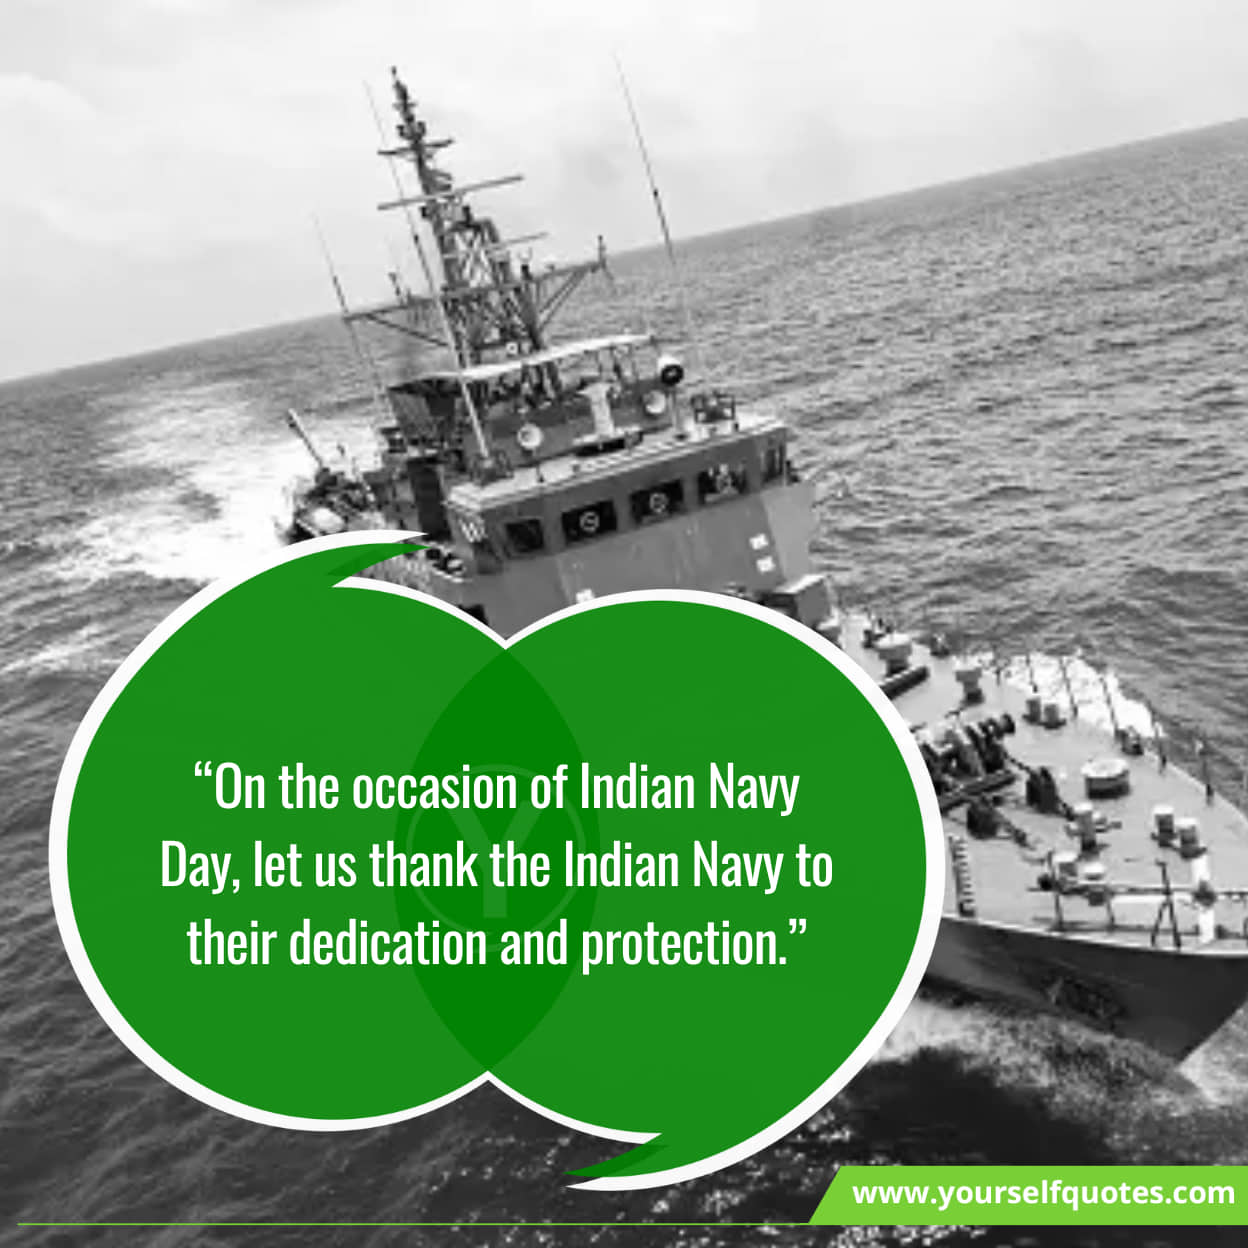 Quotes on the maritime strength of the Indian Navy